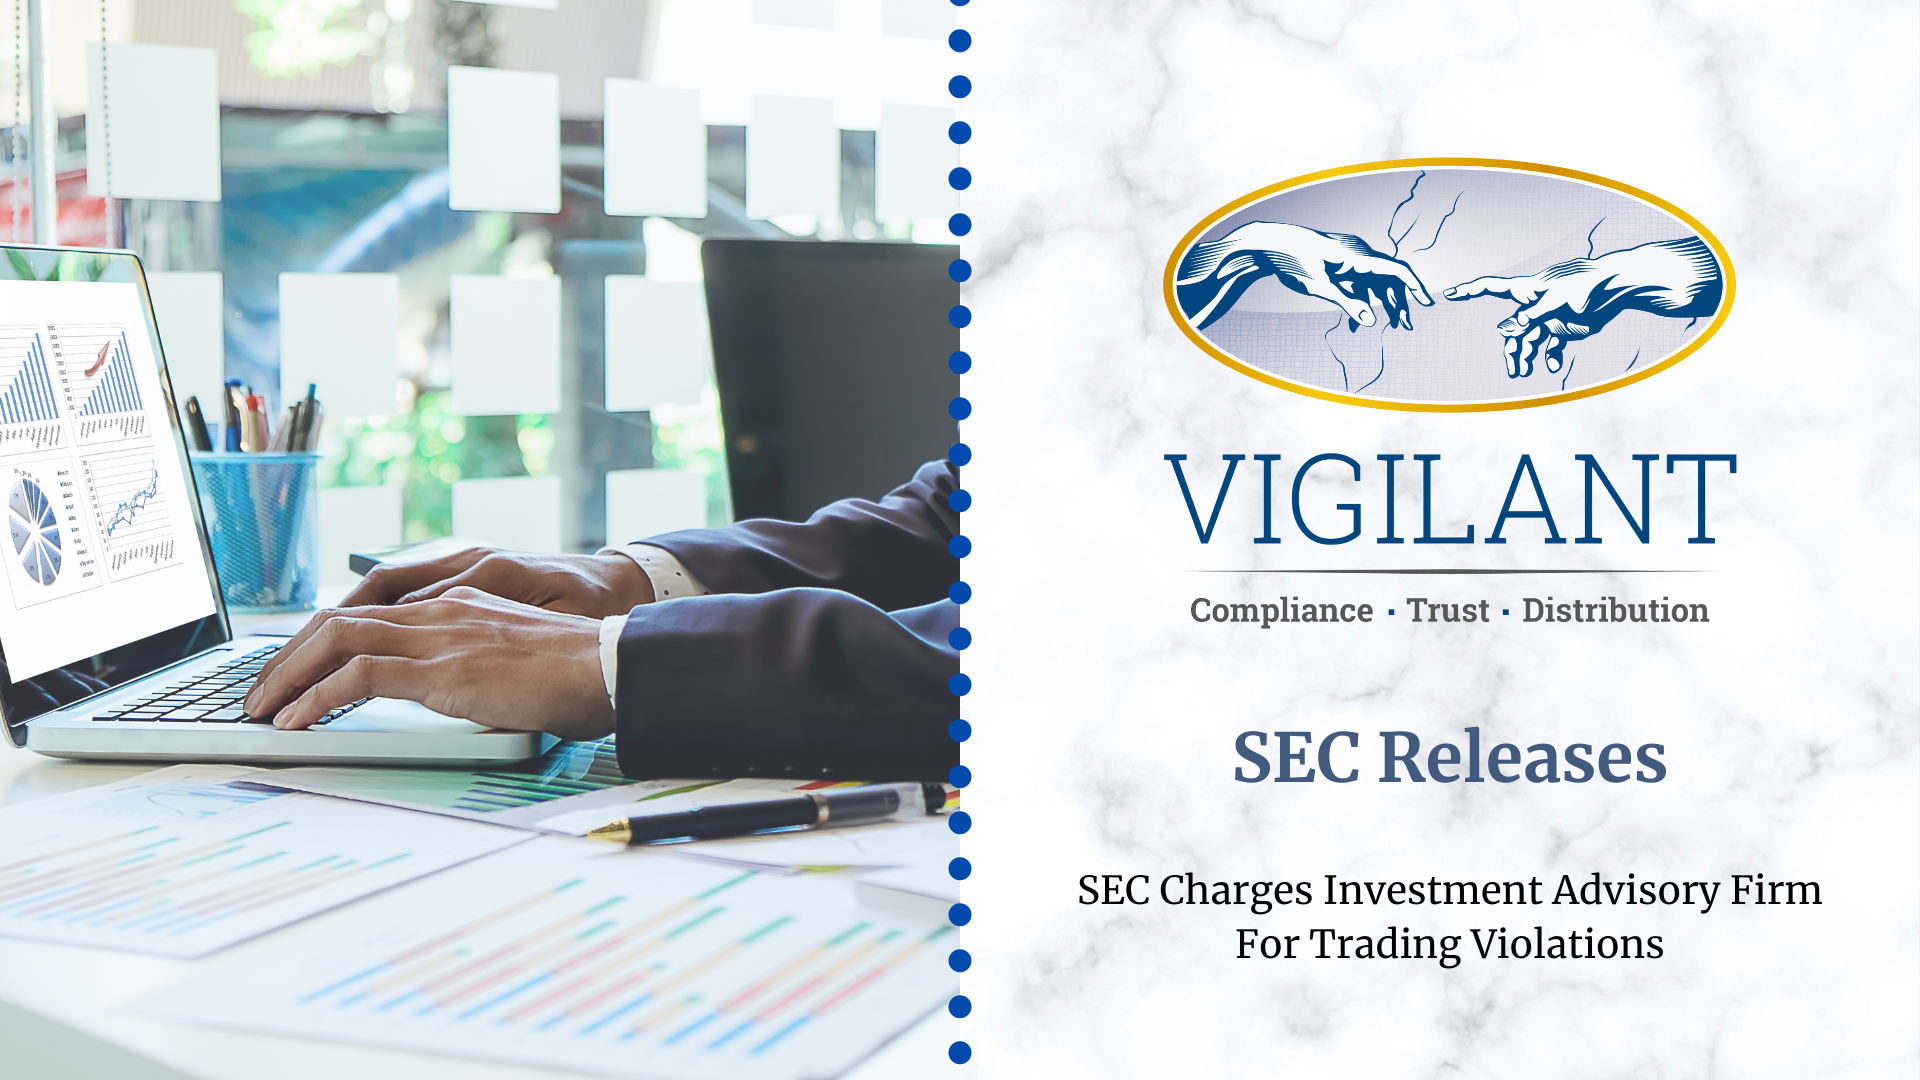 SEC Charges Investment Advisory Firm For Trading Violations